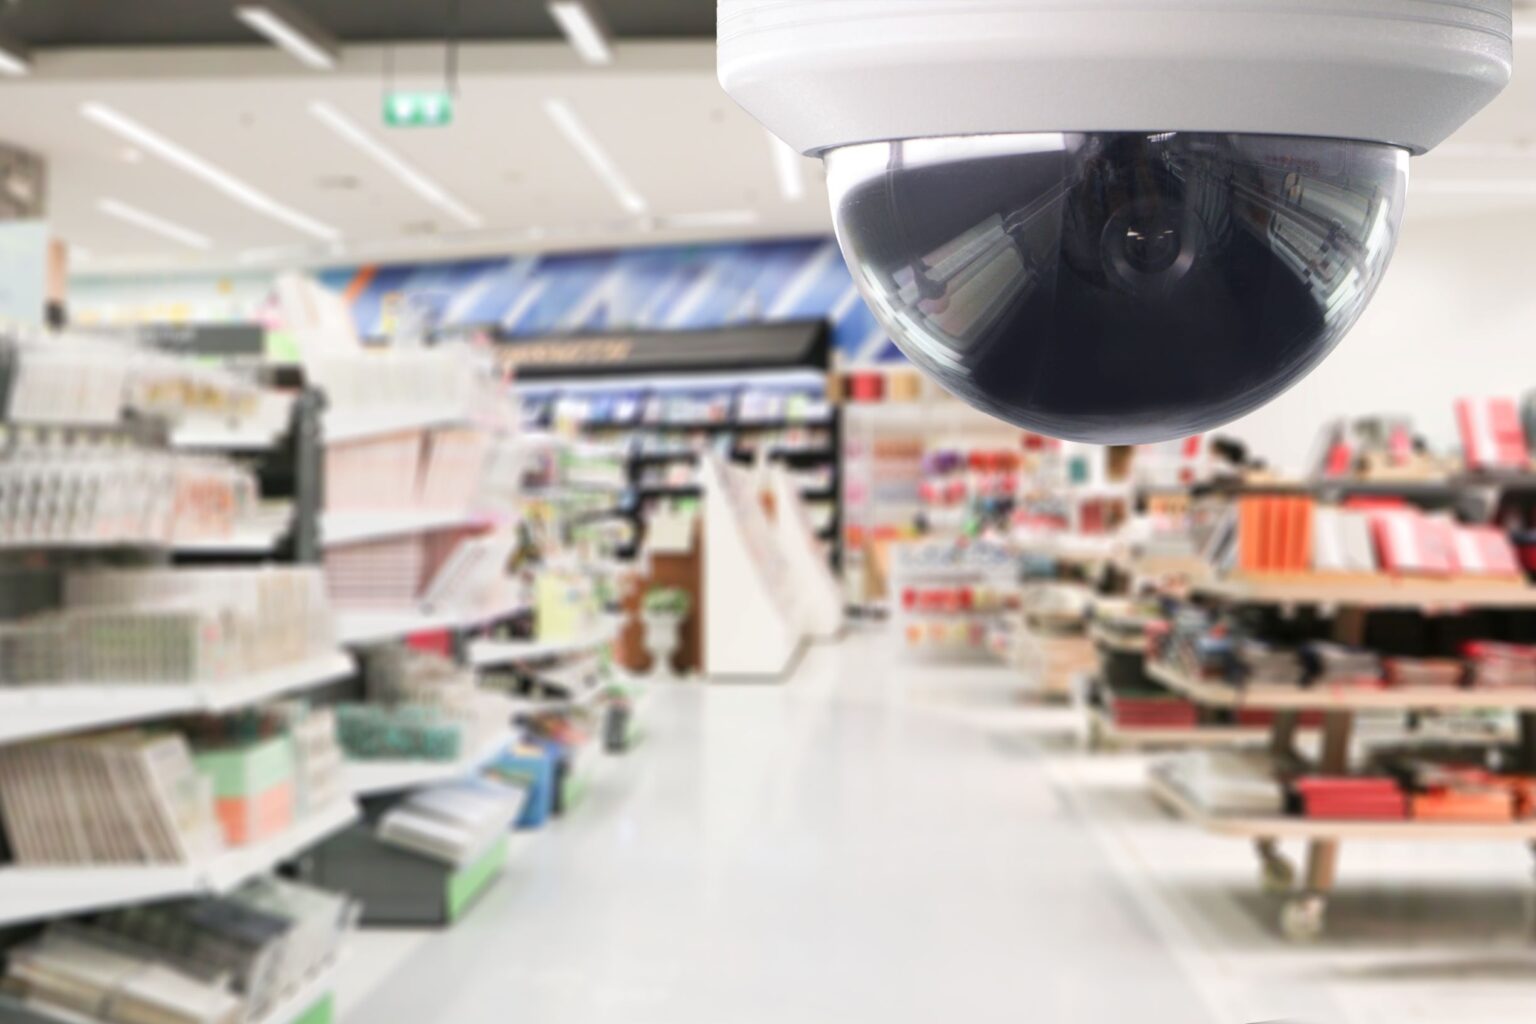 Picture of CCTV Security Camera in retail shop